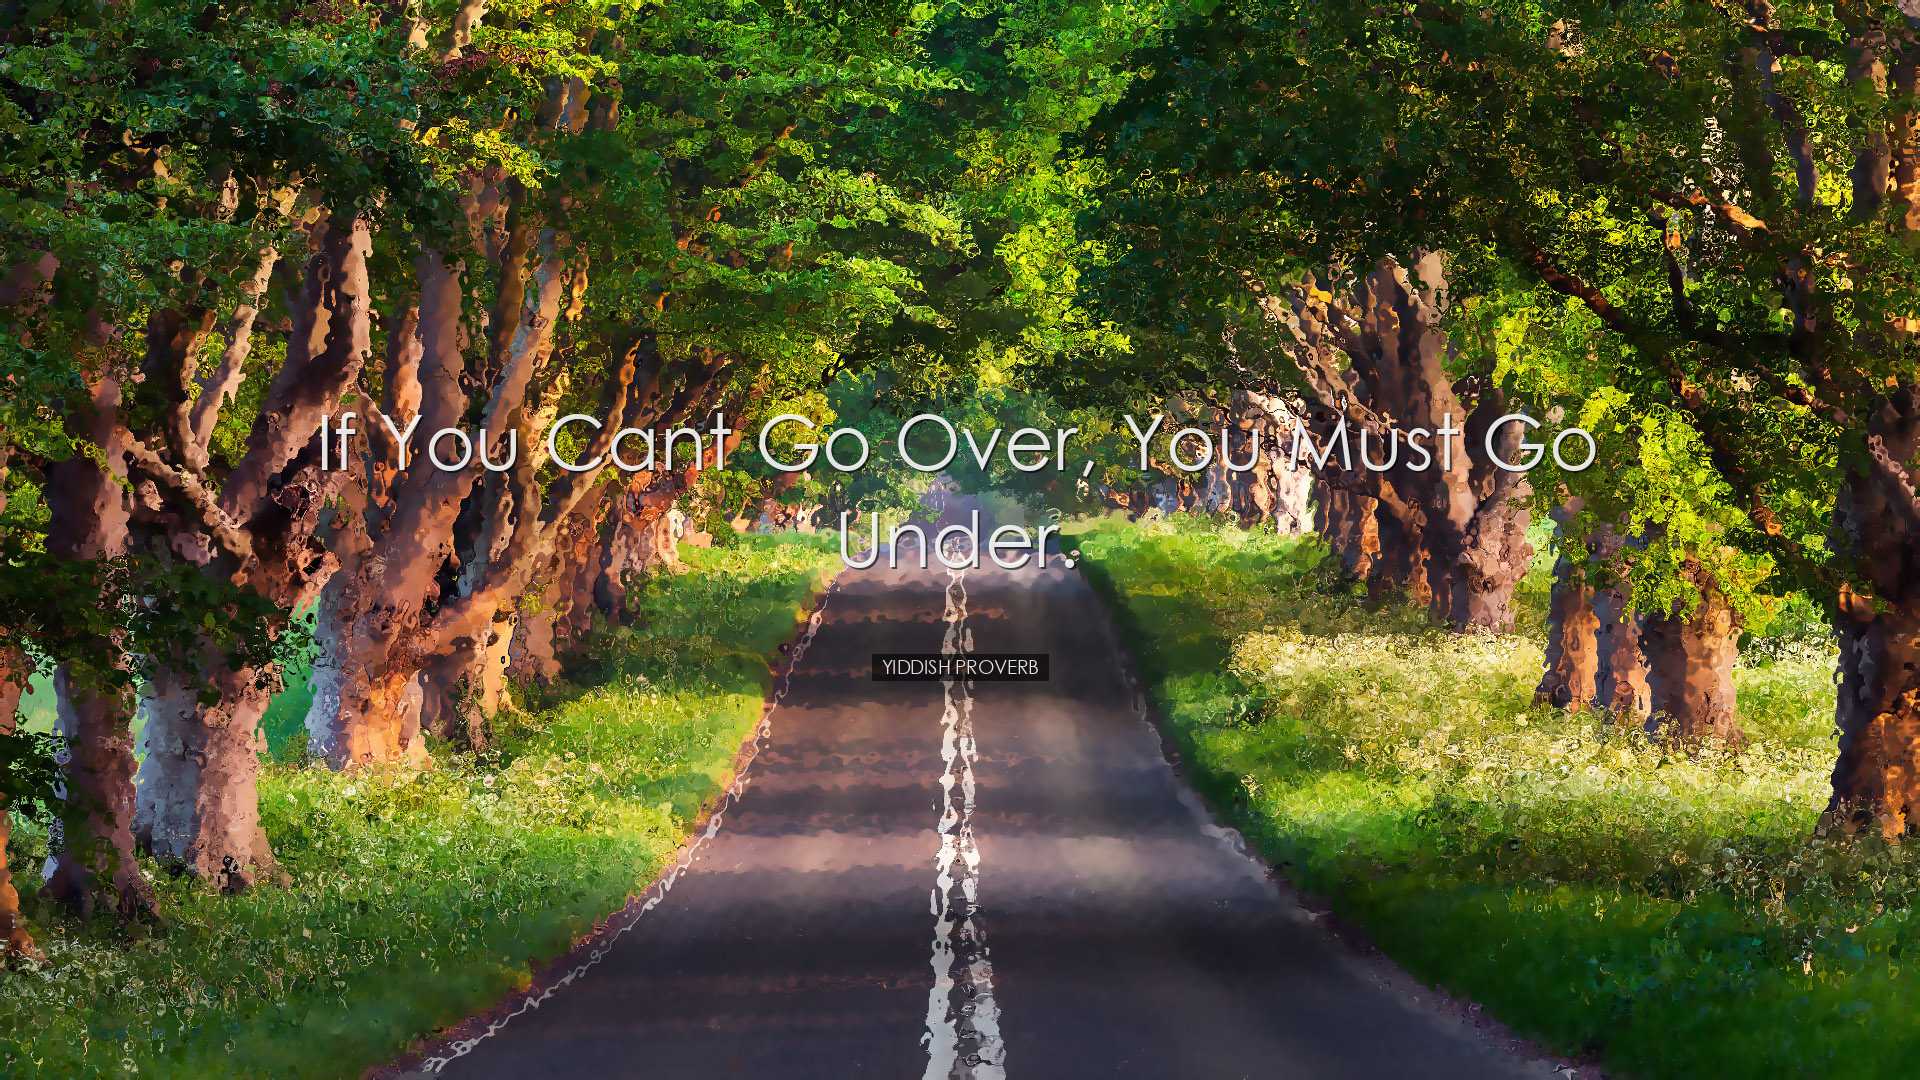 If you cant go over, you must go under. - Yiddish Proverb